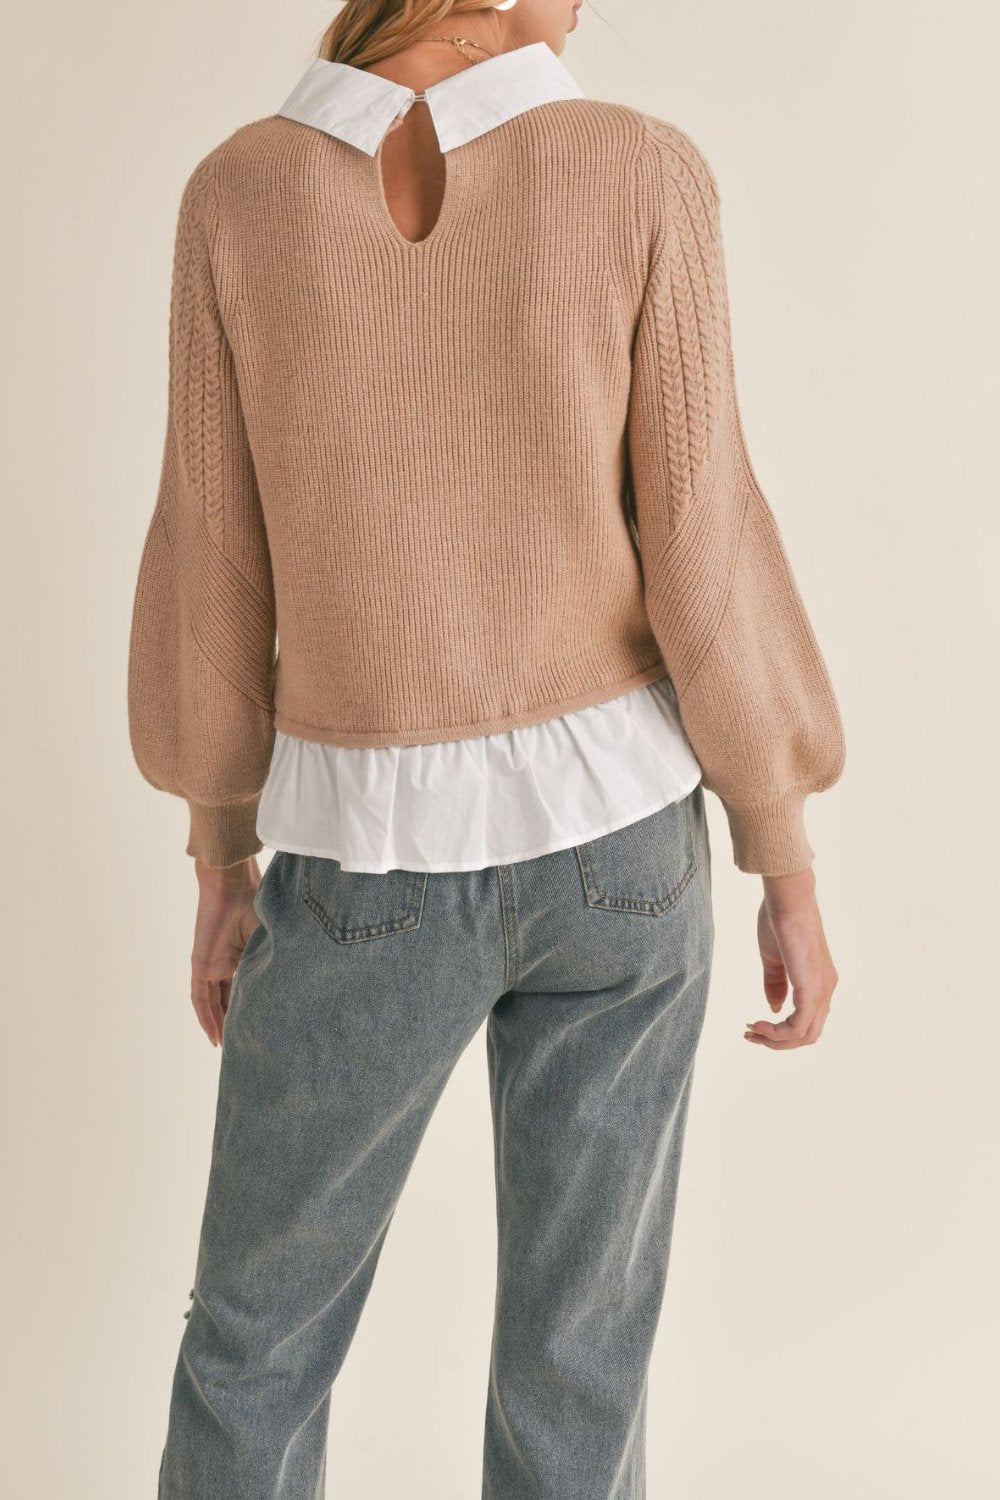 Women's Wednesday Layered Twofer Sweater Top | Tan - Women's Shirts & Tops - Blooming Daily